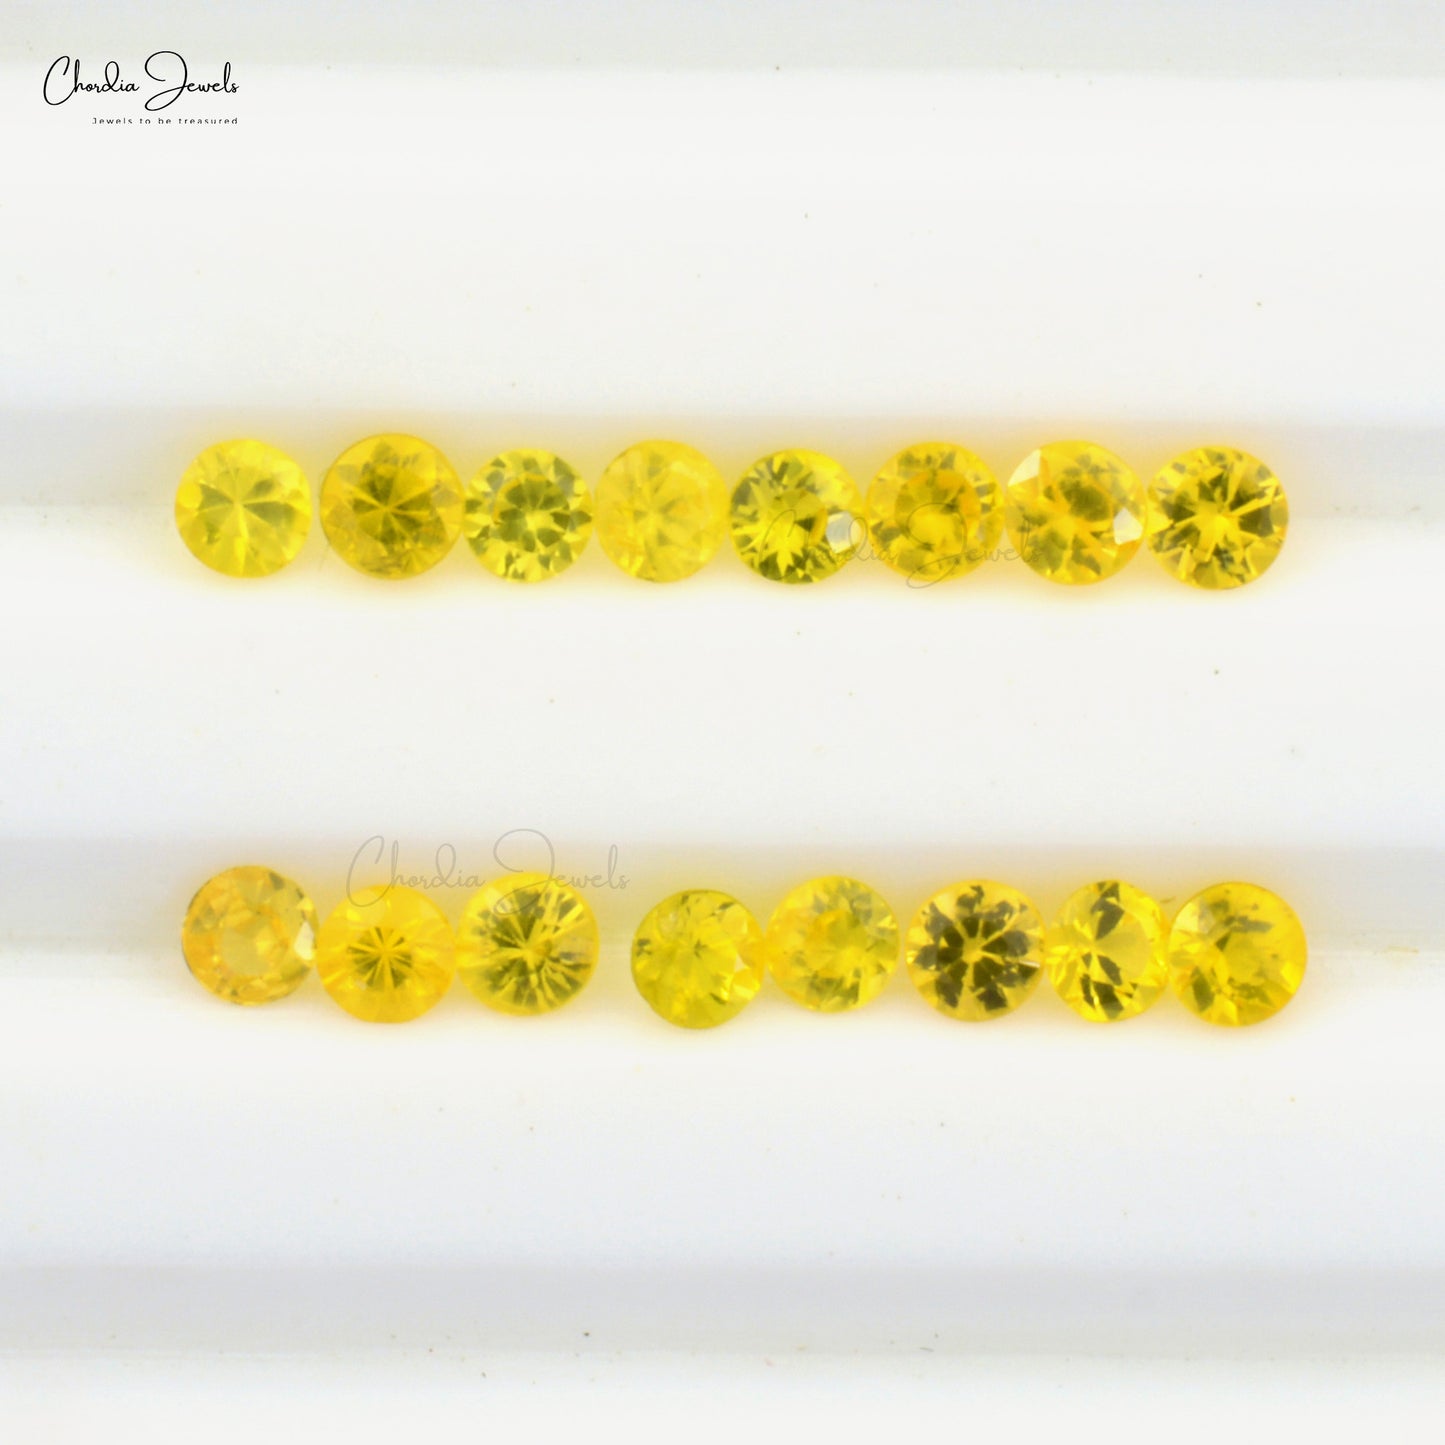 Brilliant Round-Cut 3mm / 3.50mm Yellow Sapphire Precious Gemstones. Weight: 0.1 - 0.17 Carats. Stone Quality: AAA Grade. Stone Cut: Excellent, Precious Gemstones from Chordia Jewels